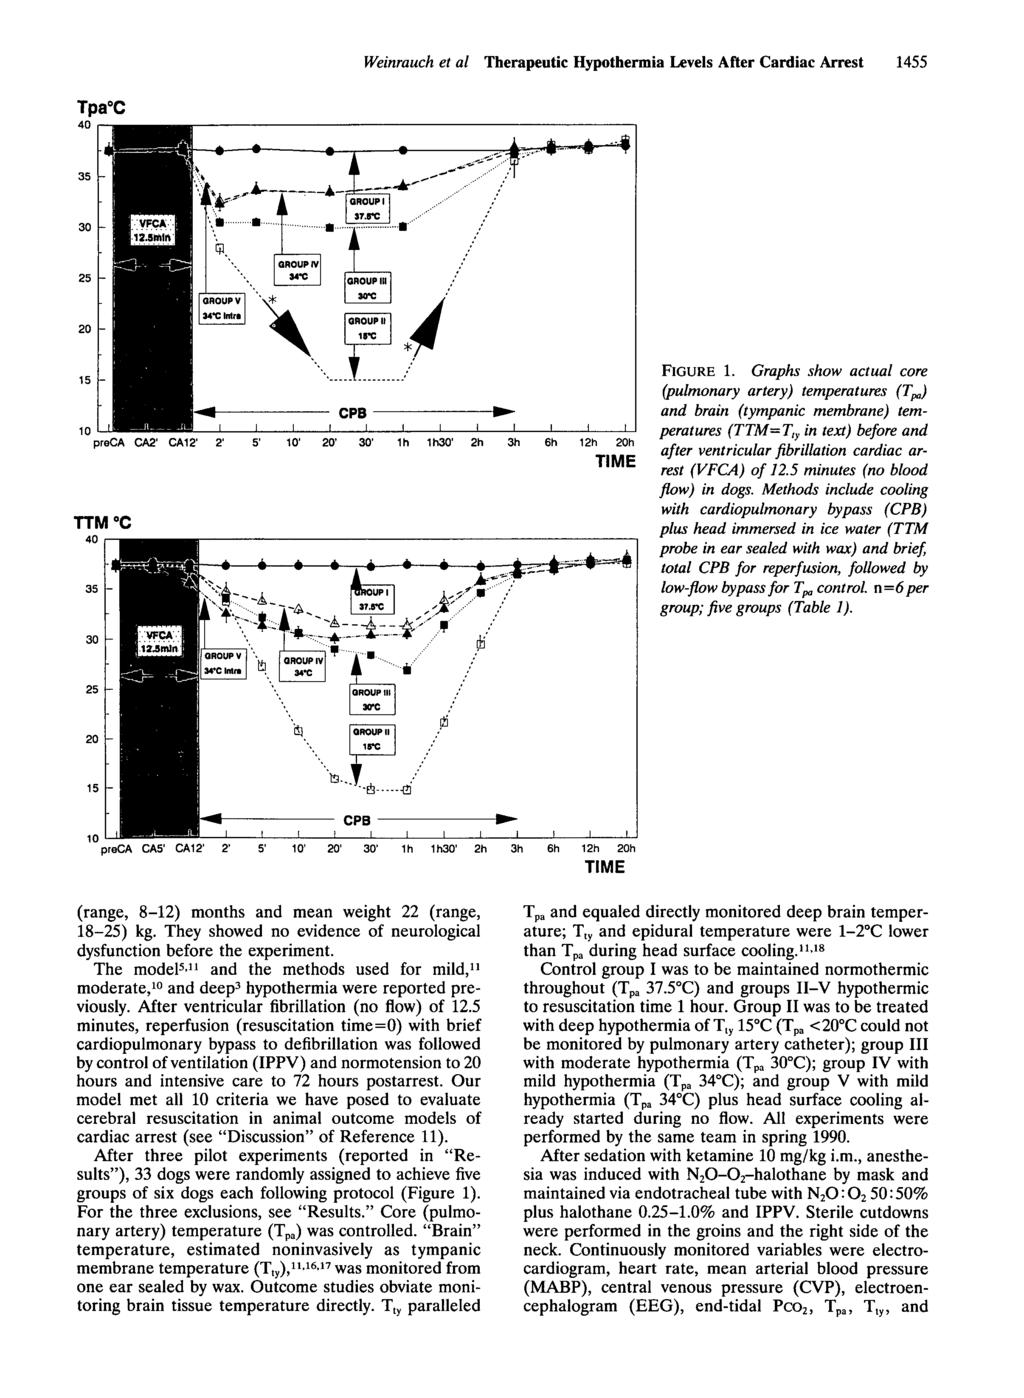 Weinrauch et al Therapeutic Hypothermia Levels After Cardiac Arrest 1455 preca CA2 1 CA12 1 30' 1h 1h30' 2h 3h 6h 12h 20h TIME 20-15 - OROUP V 34'CIMn -A- ^ : : f OROUP IV 34-C flnoupi 37.rc -.